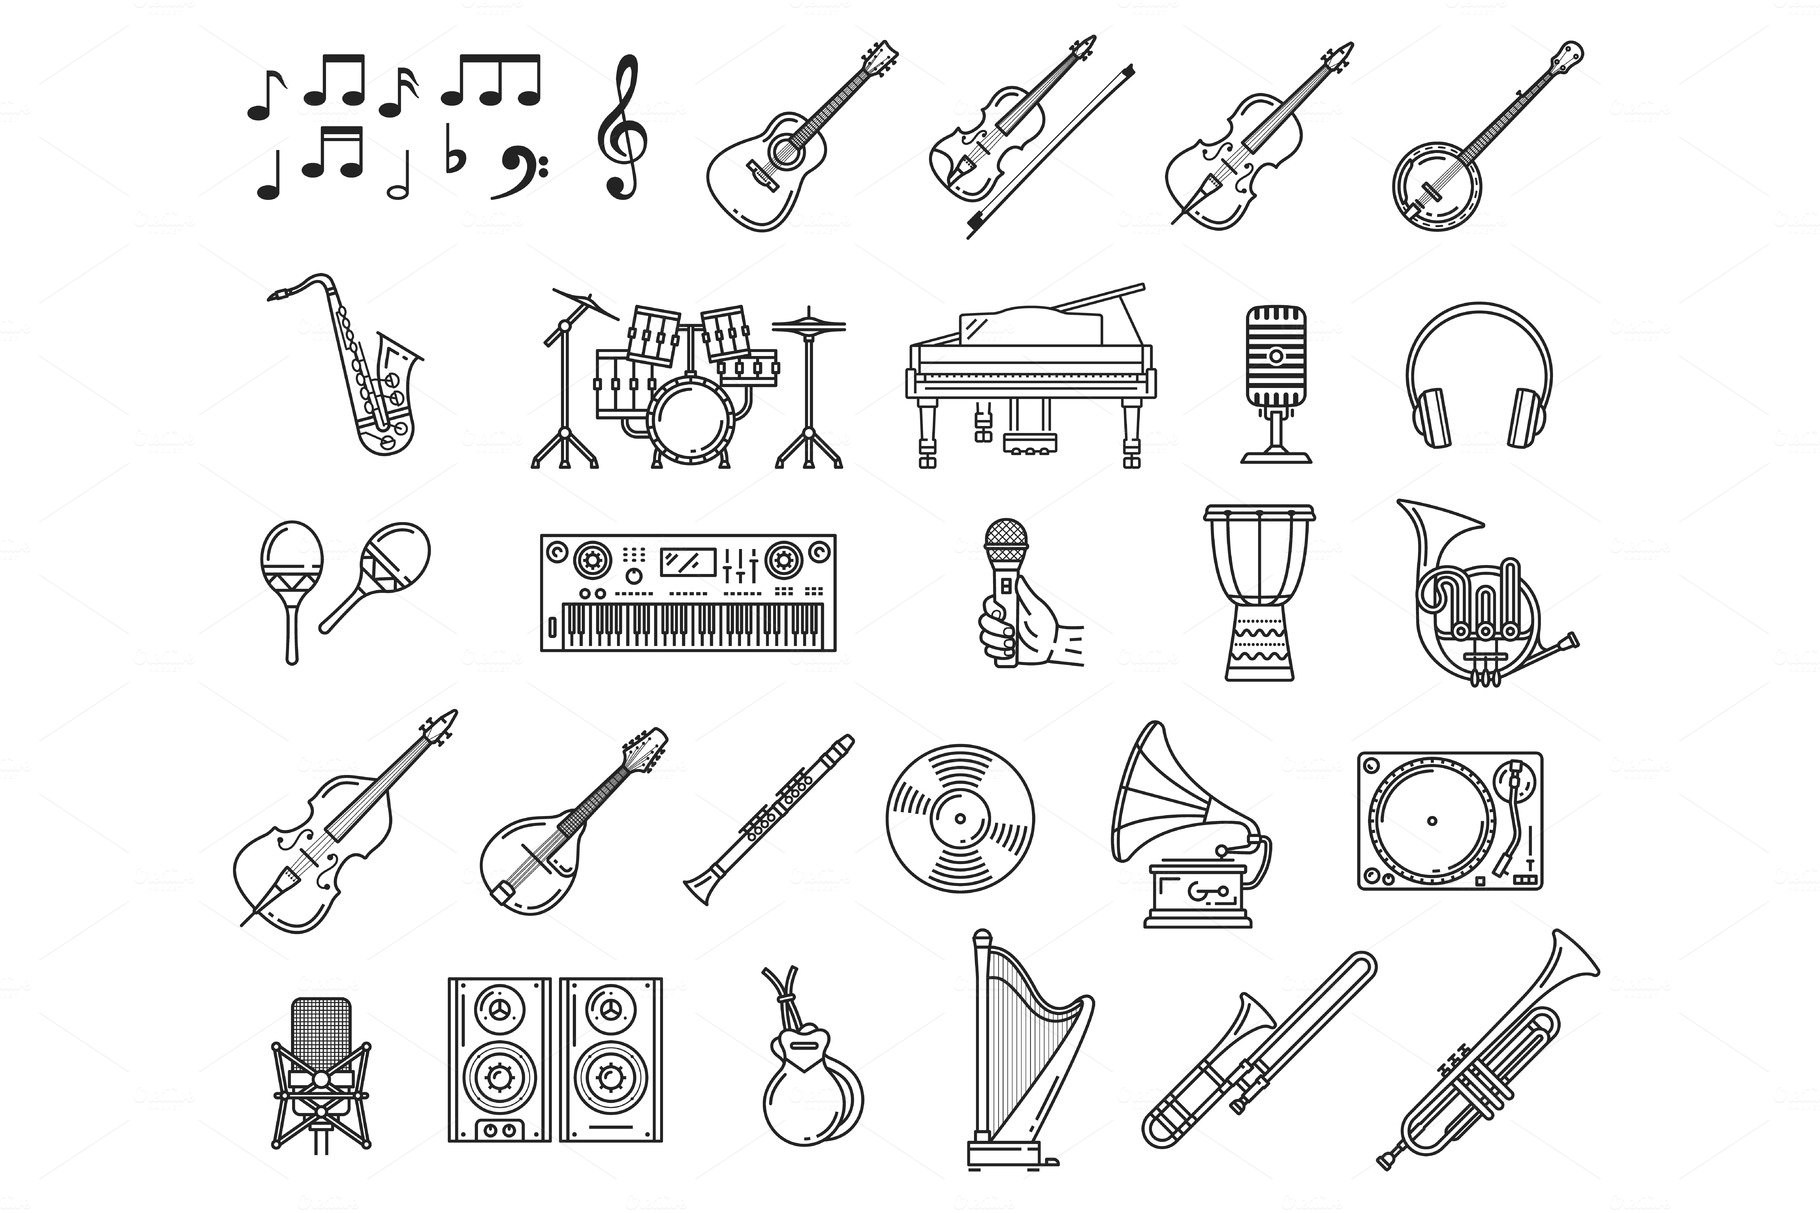 Music icons of piano, guitar cover image.